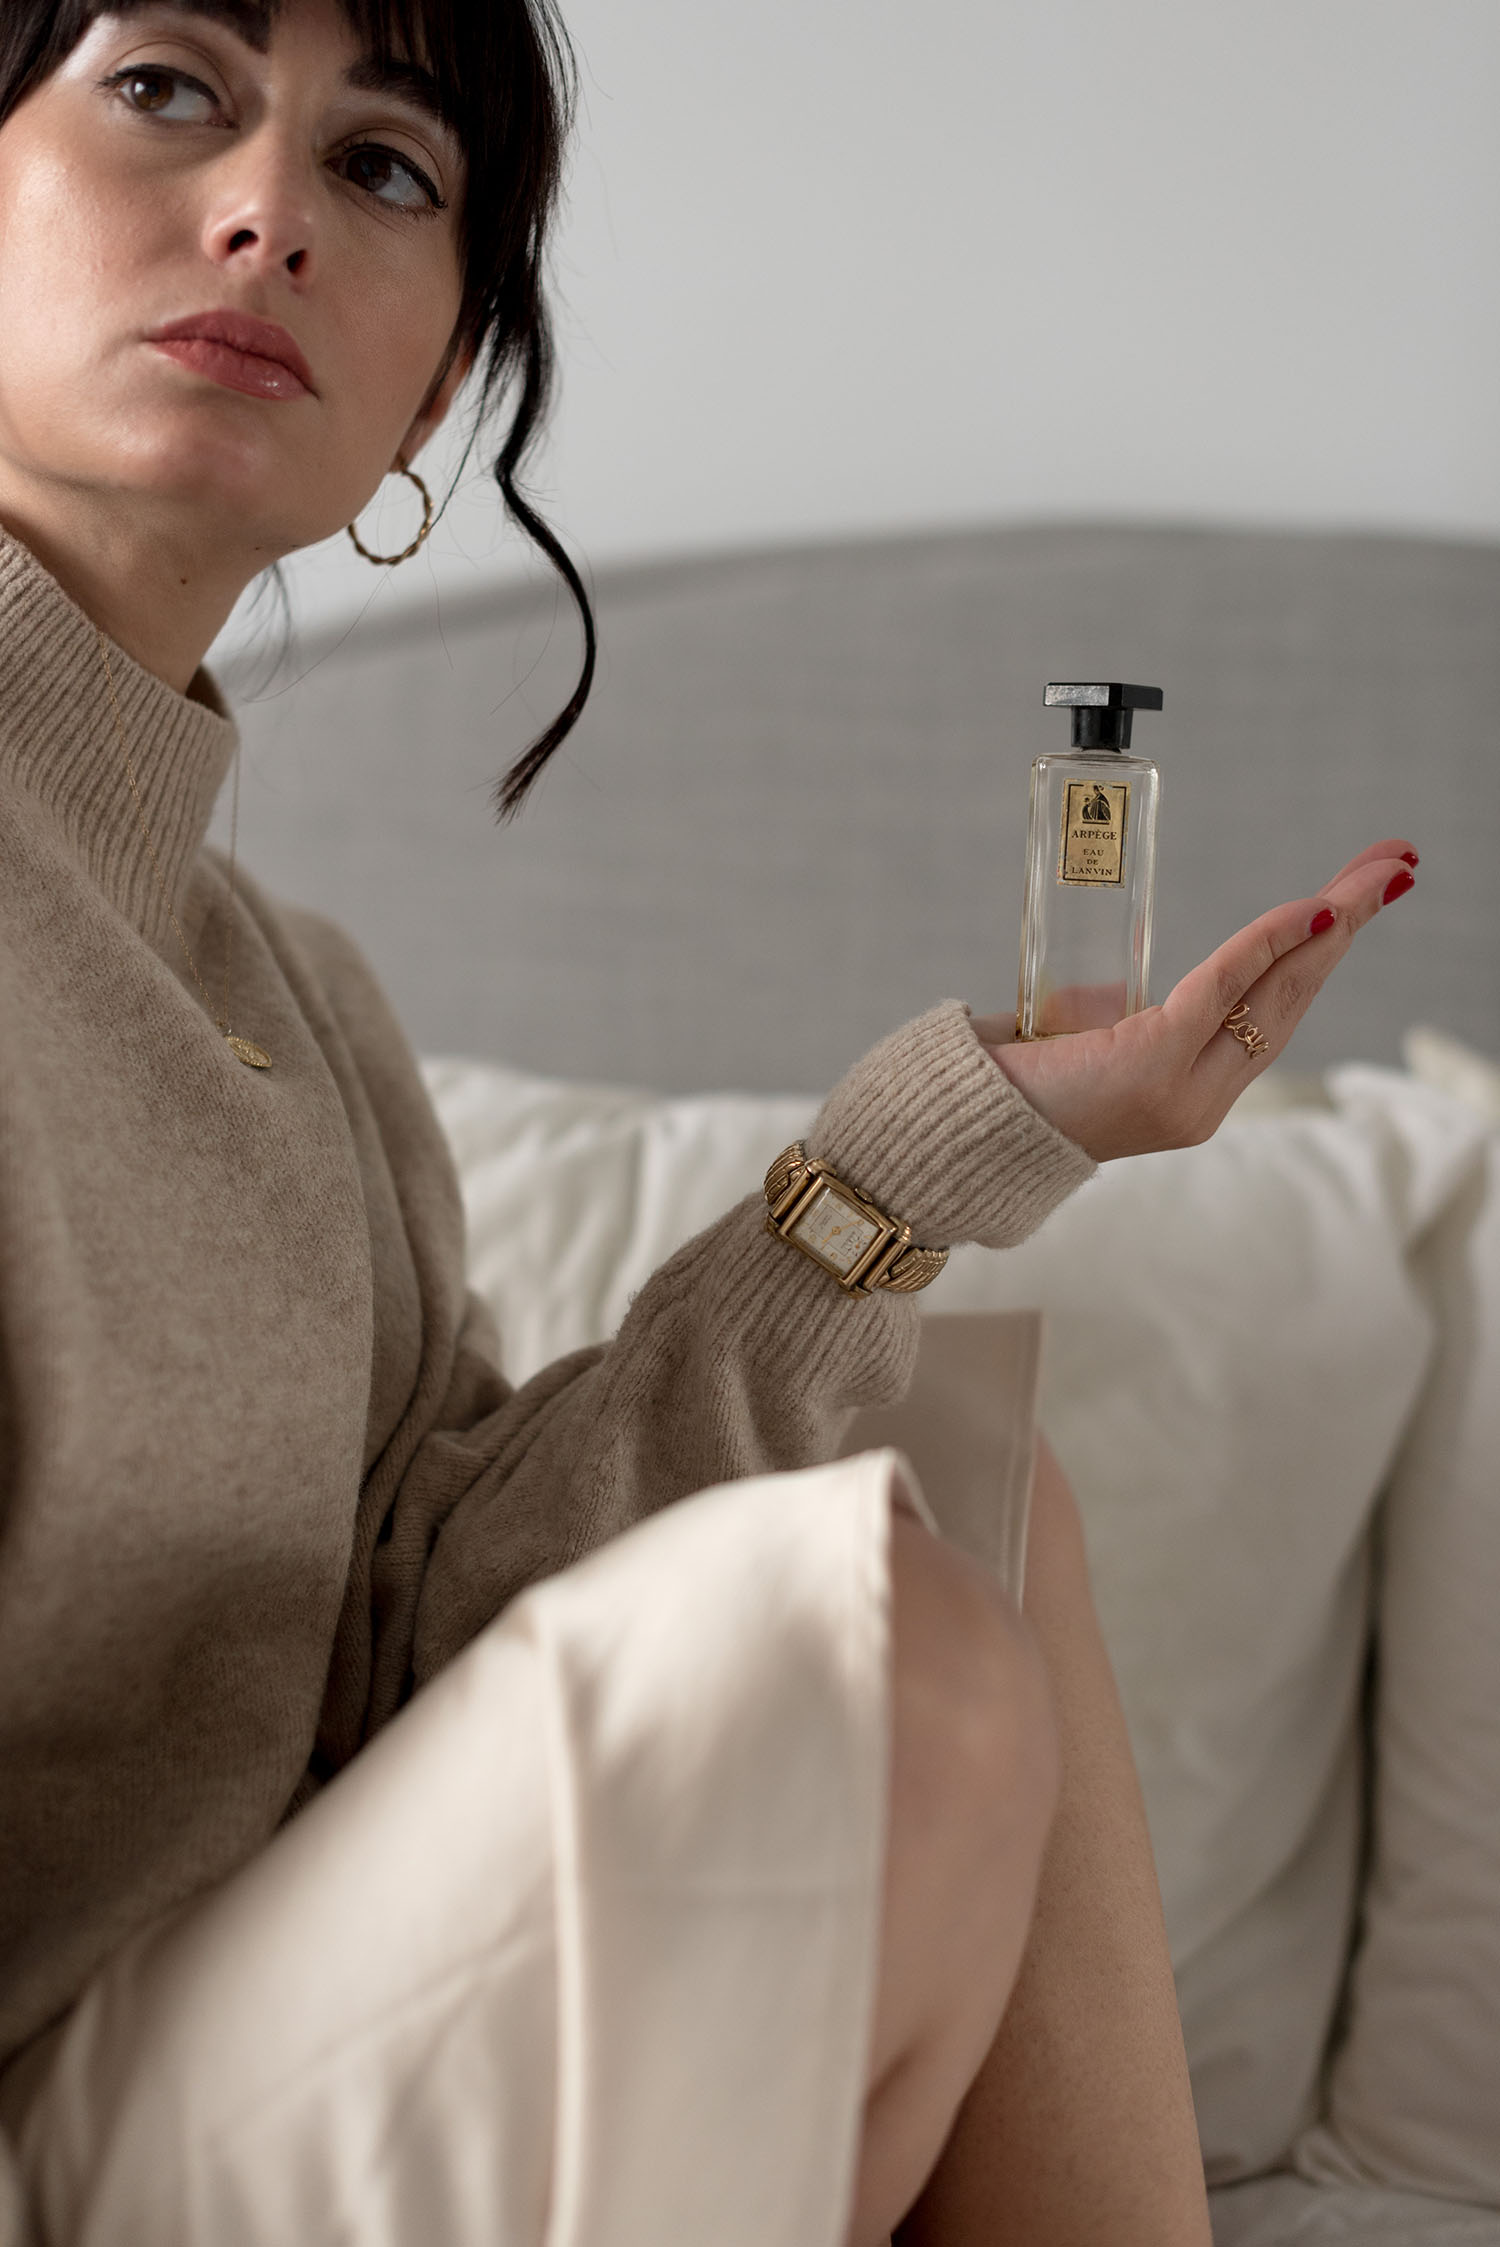 Portrait of top Canadian fashion blogger Cee Fardoe of Coco & Vera, holding a vintage bottle of Lanvin's Arpege perfume and wearing an H&M beige sweater